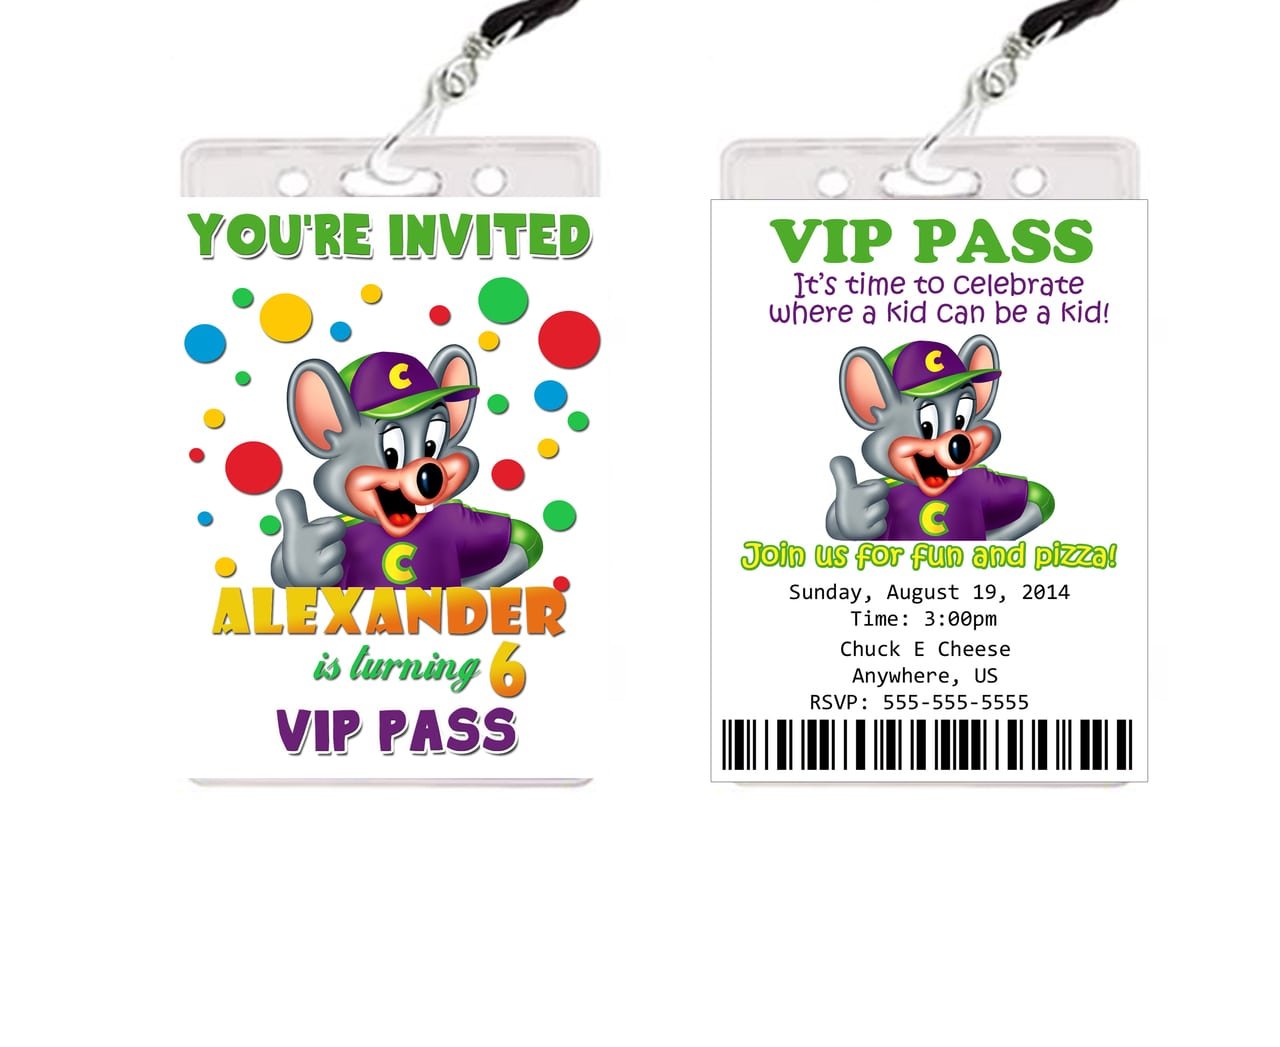 17 Best Images About Chuck E Cheese Party On Pinterest